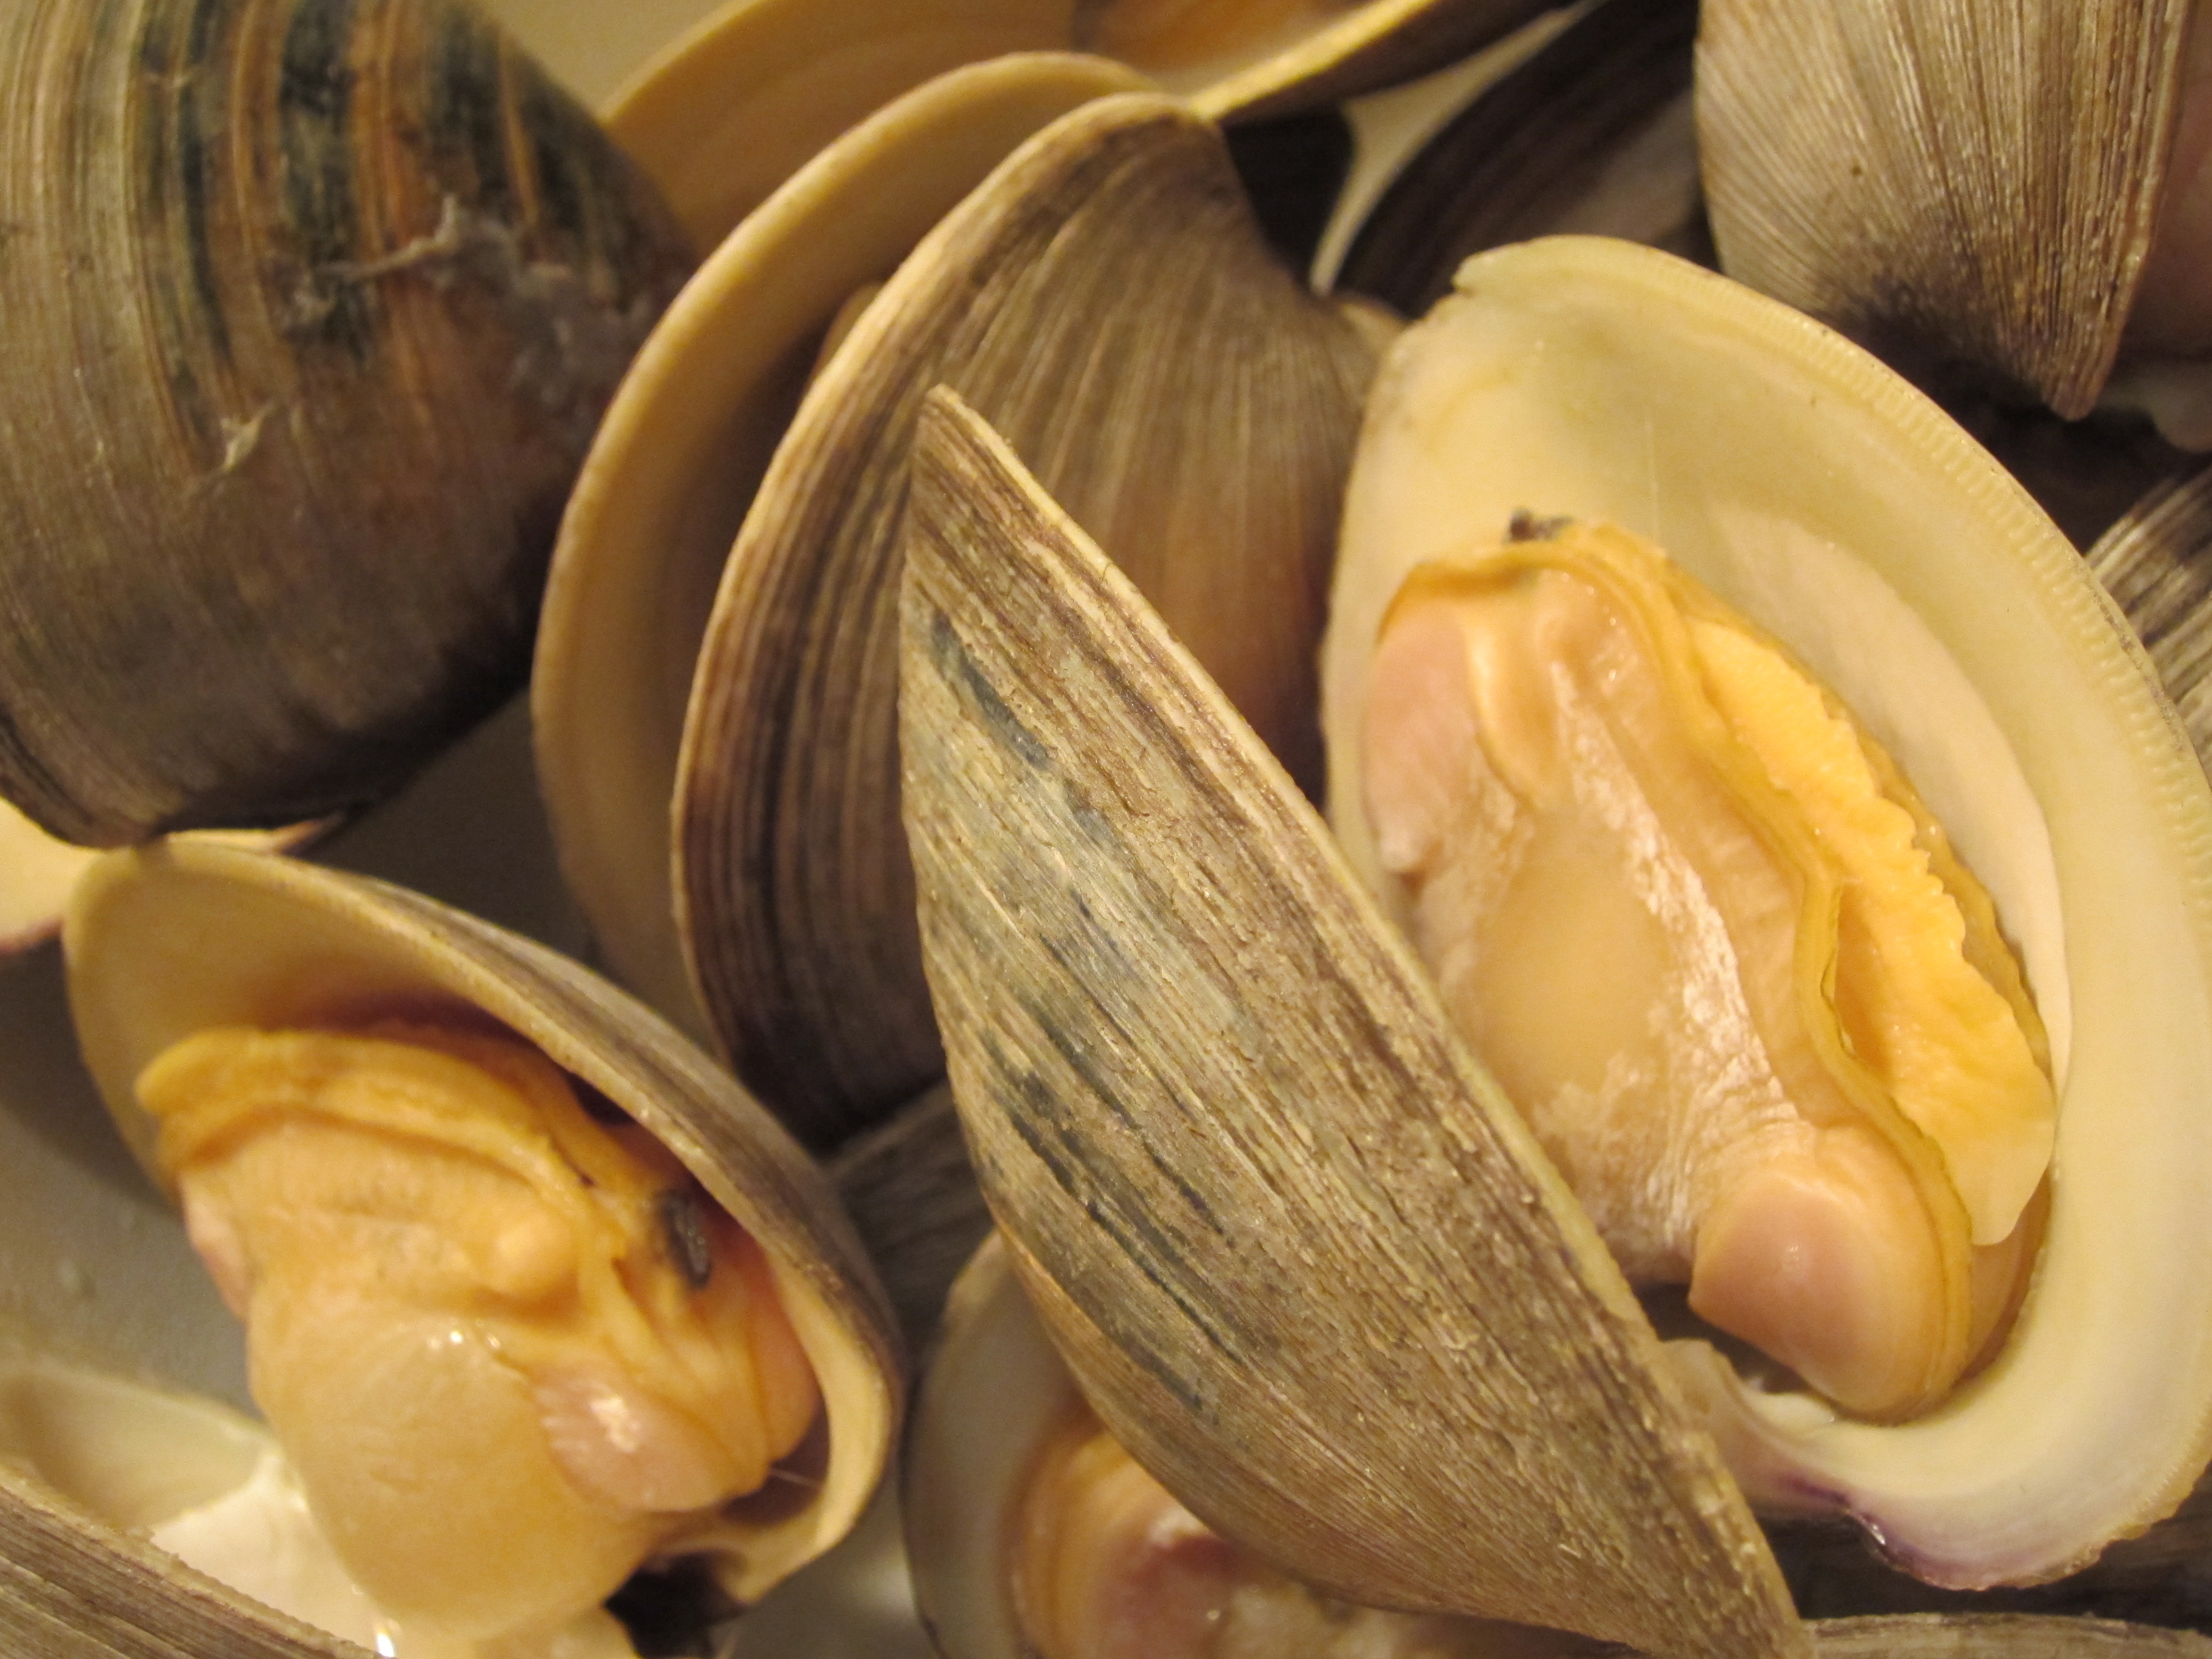 3) With using a table knife, take the clam meat from the shell. 